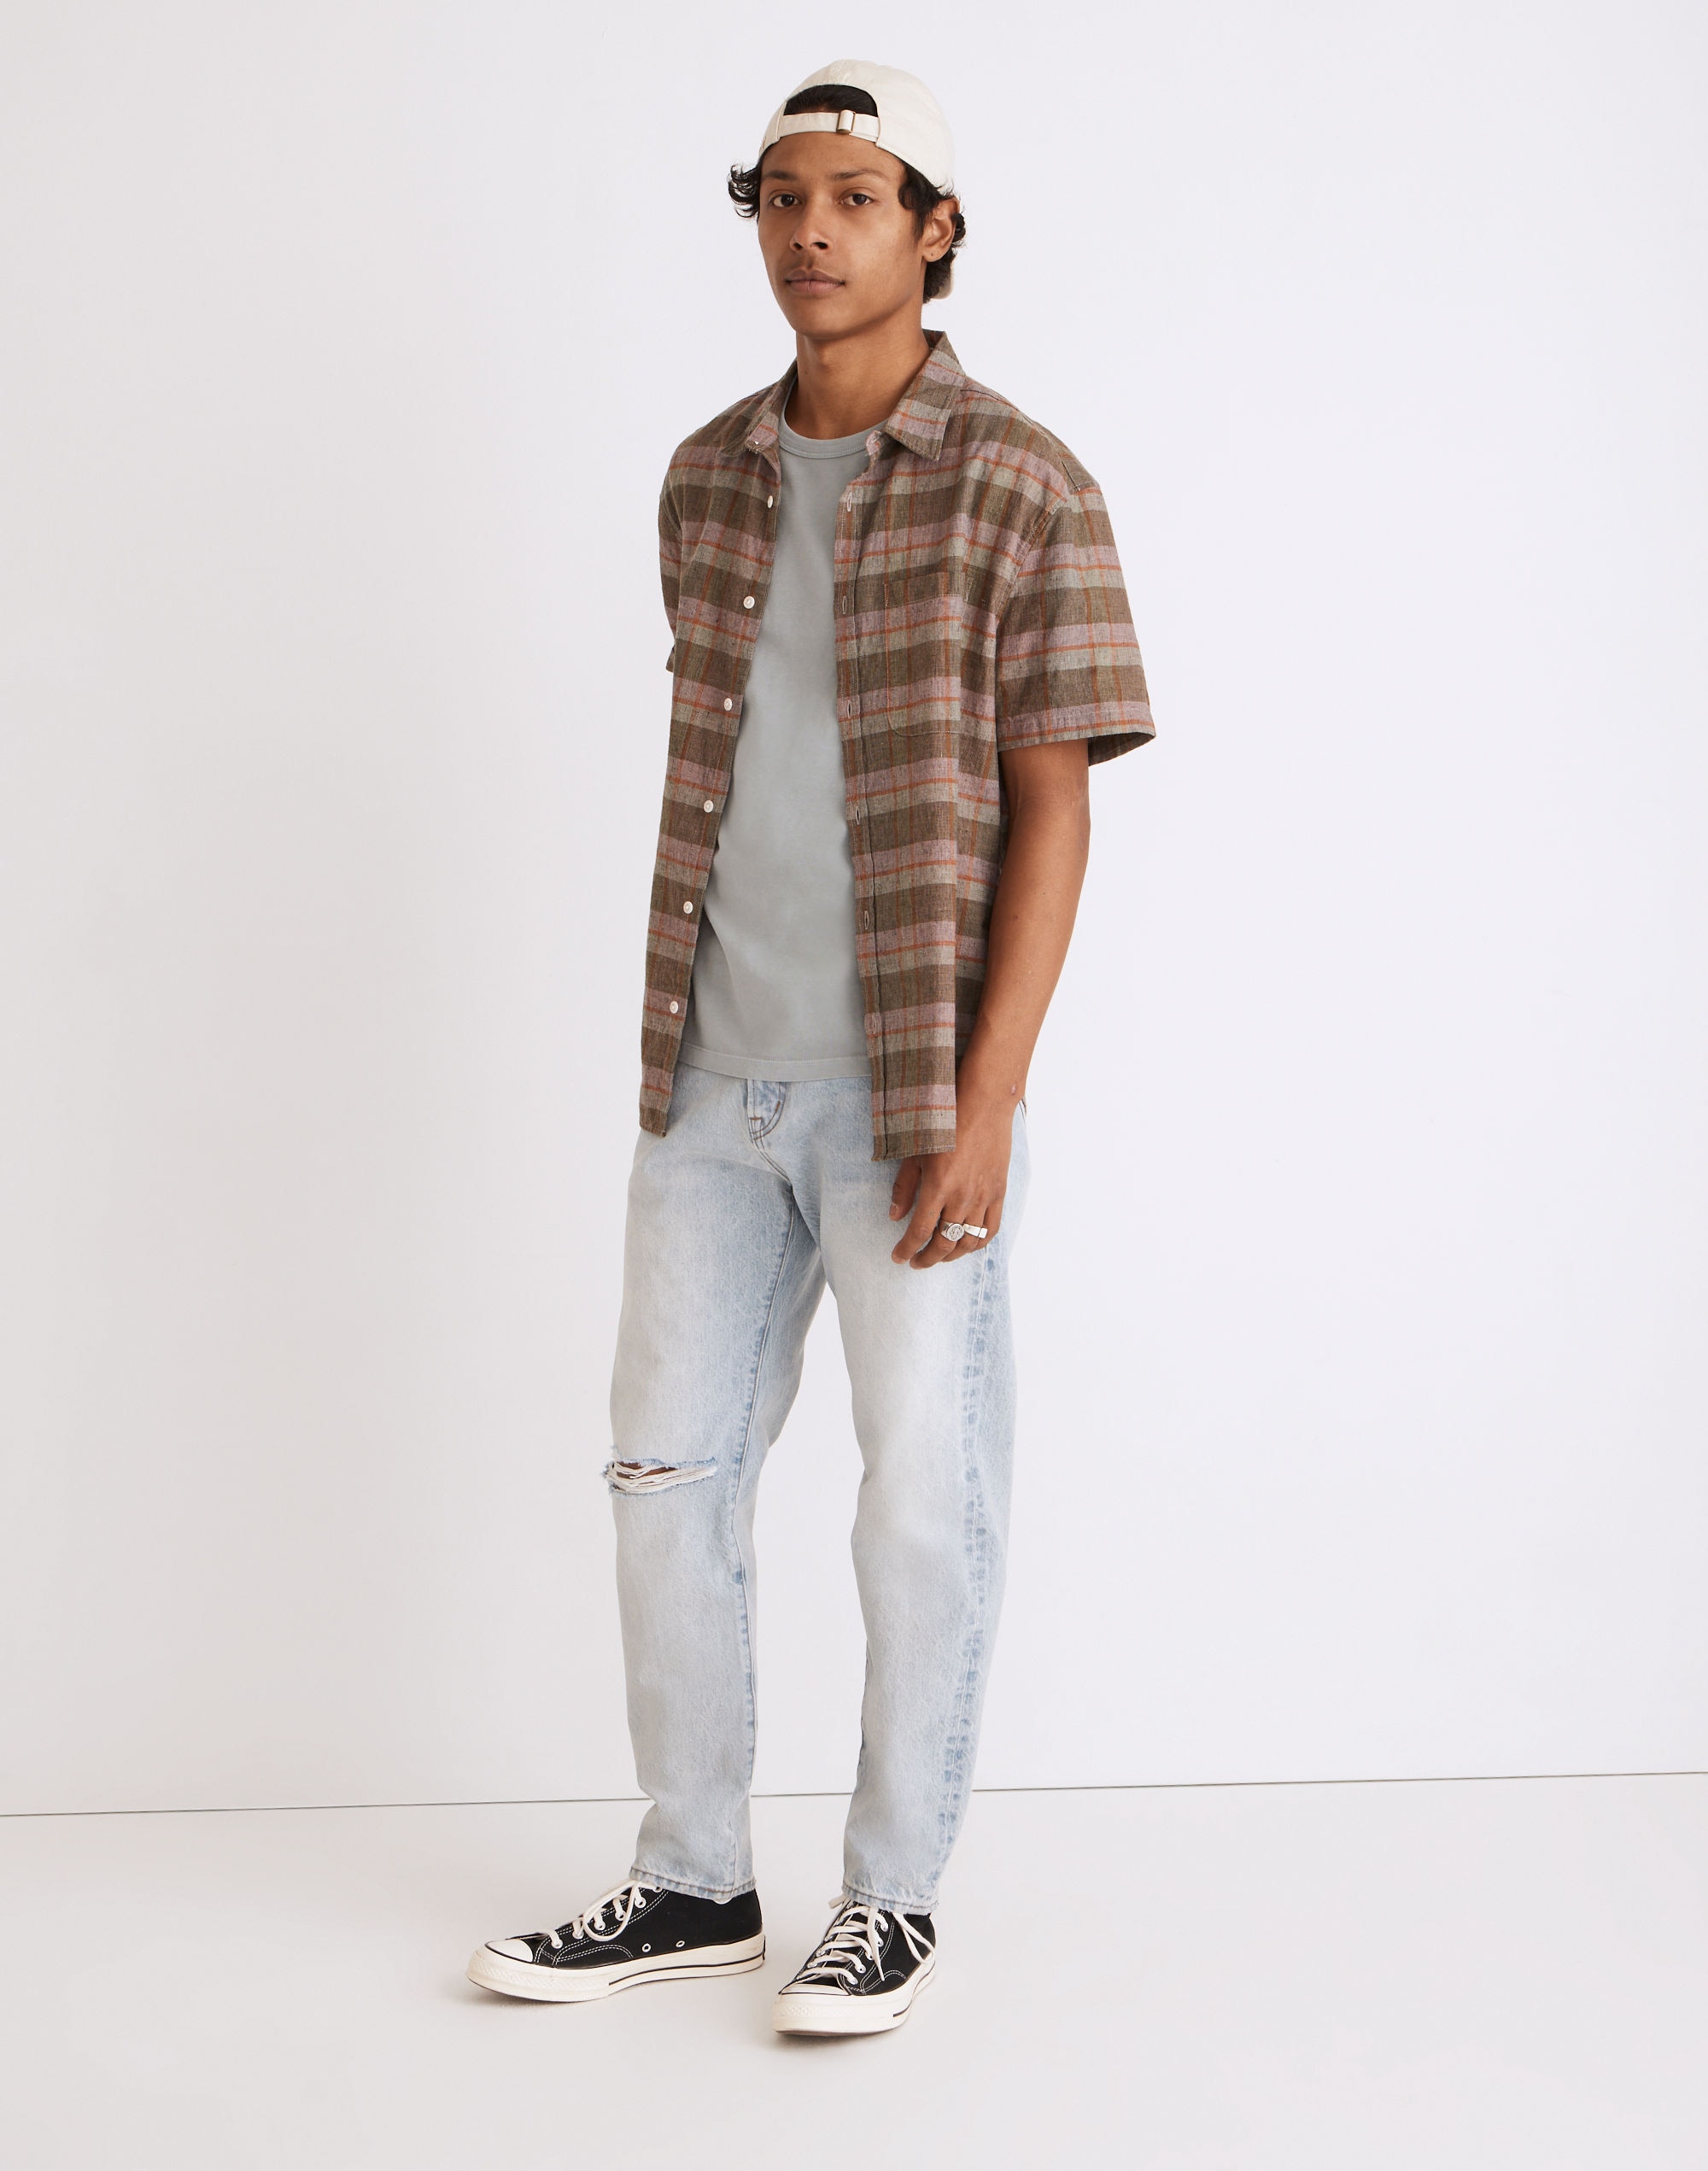 Relaxed Taper Jeans in Leeland Wash: Ripped Edition